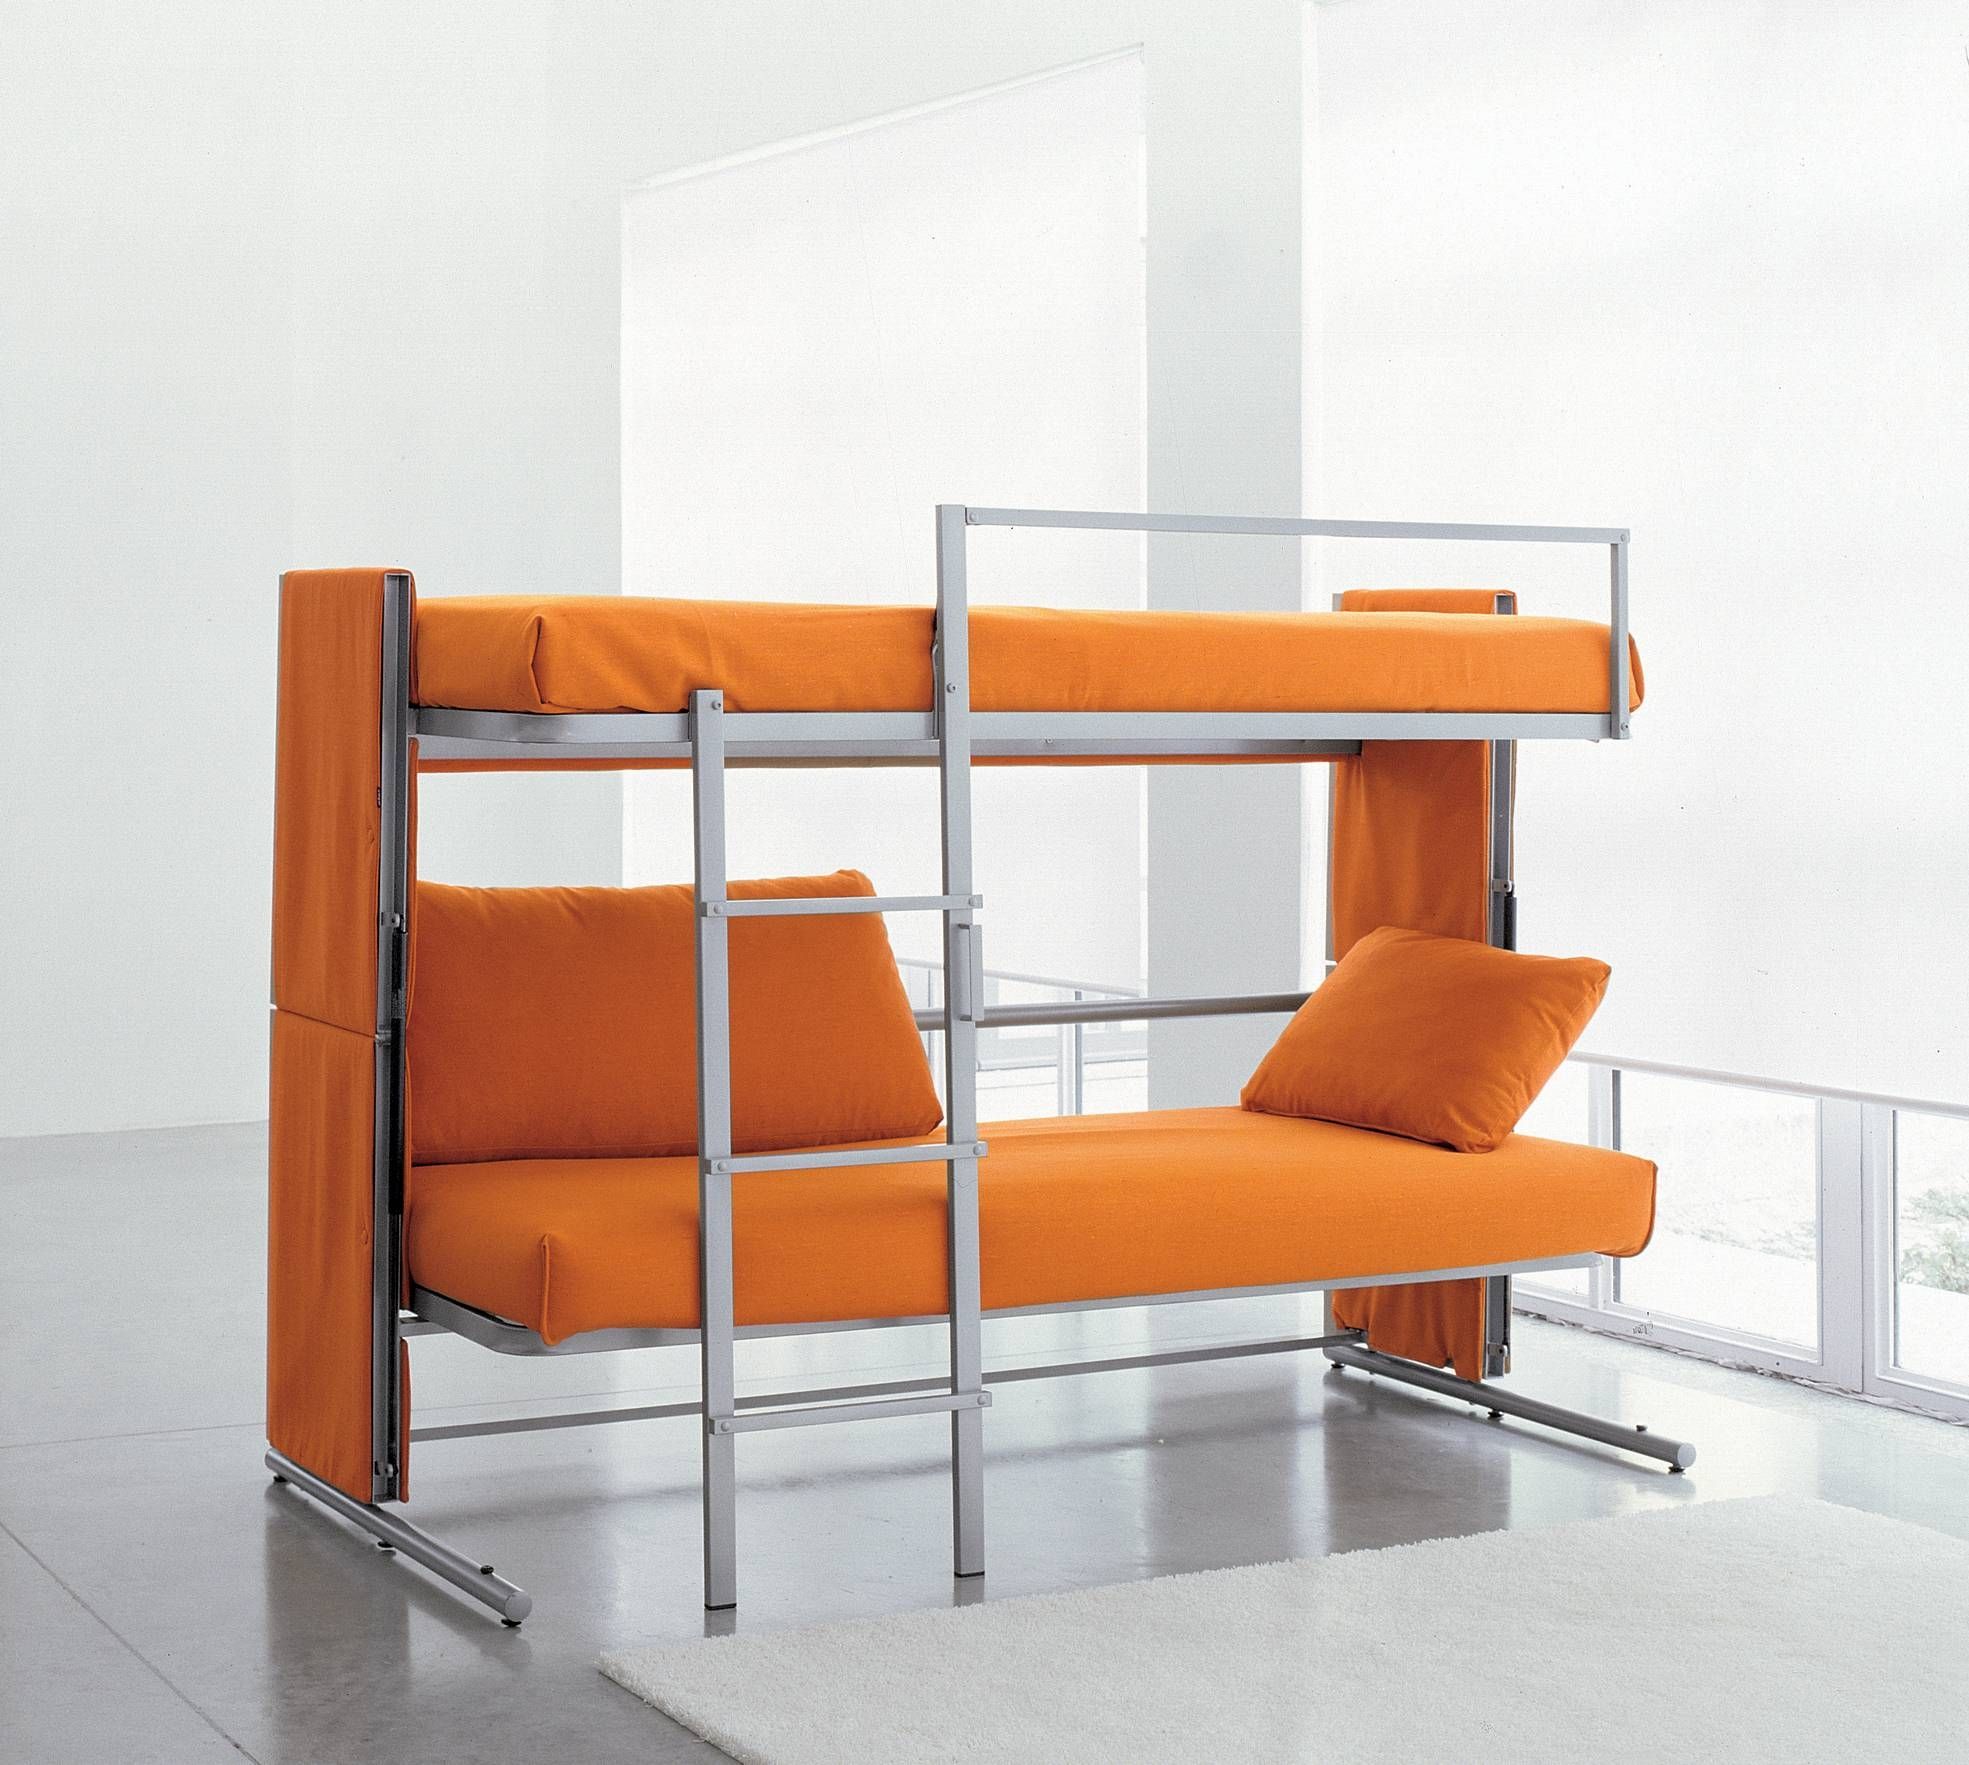 Doc A Sofa Bed That Converts In To A Bunk Bed In Two Secounds Regarding Sofa Bunk Beds (Photo 1 of 30)